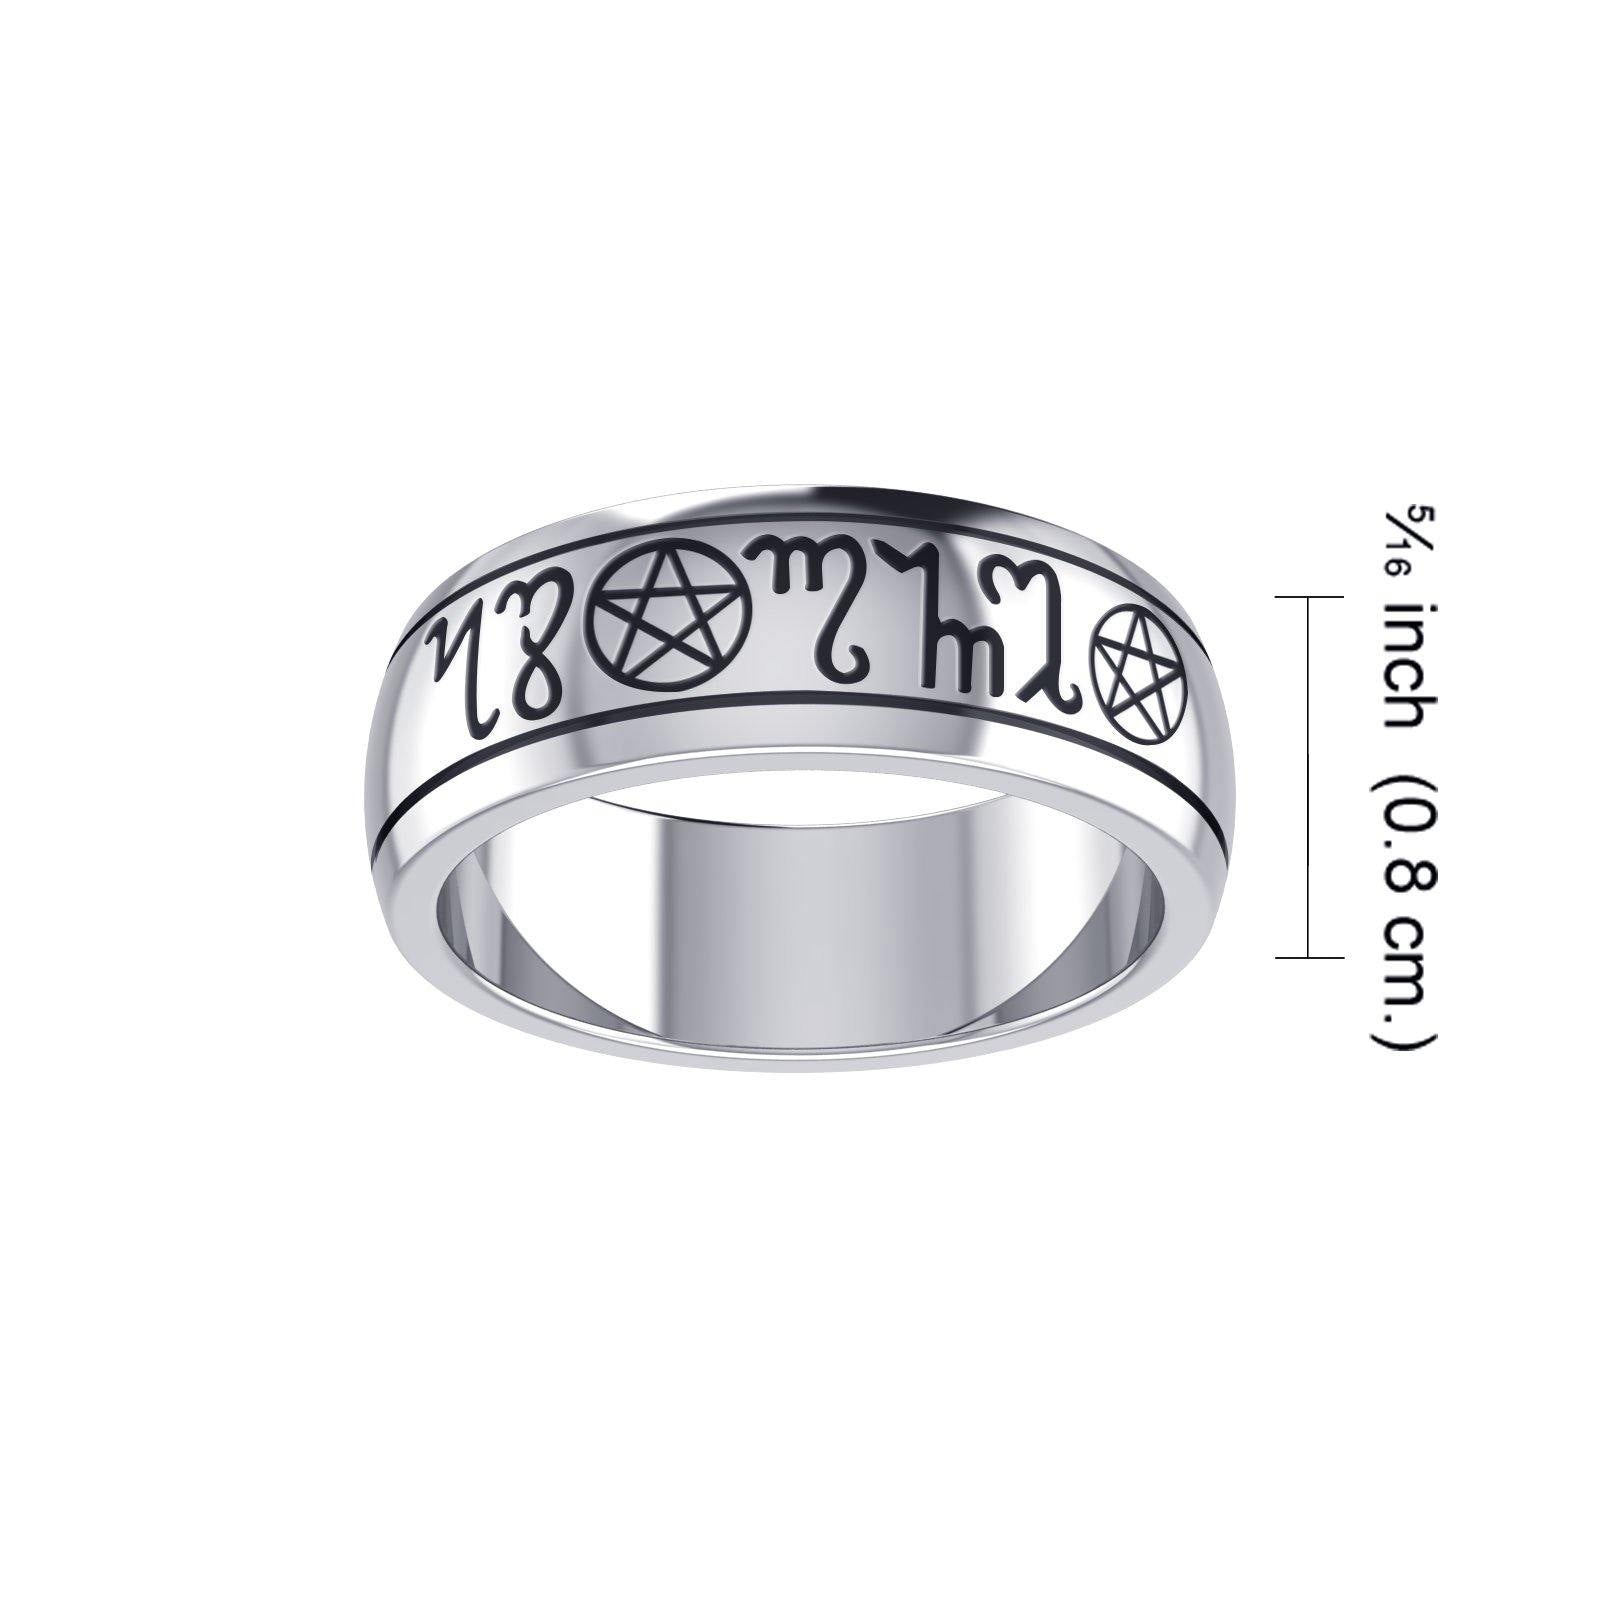 Theban Silver Handfasting Ring TRI057 - Jewelry